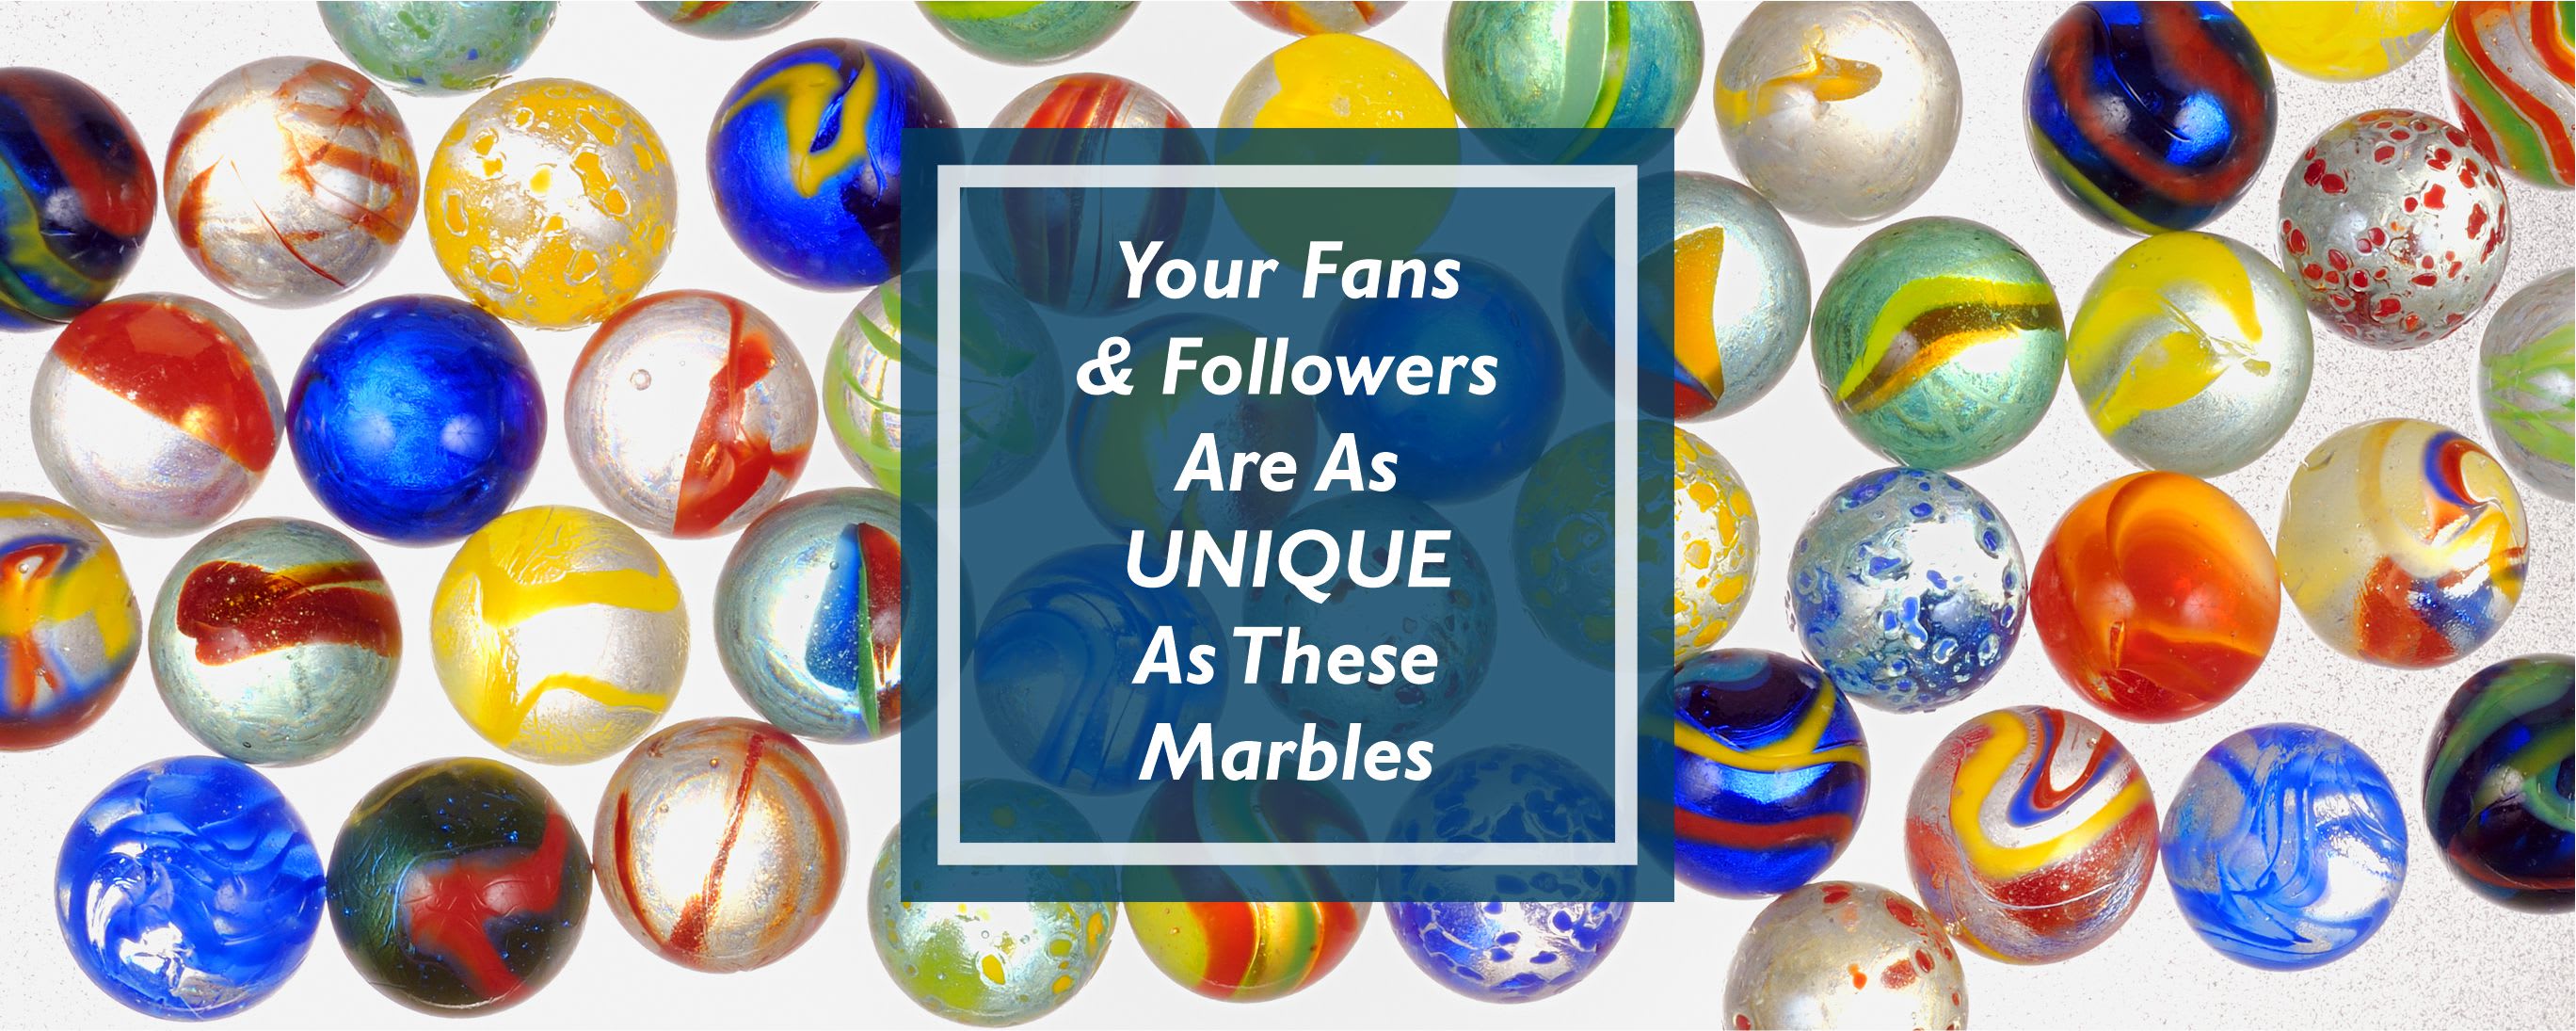 fans and follwers unique as marbles